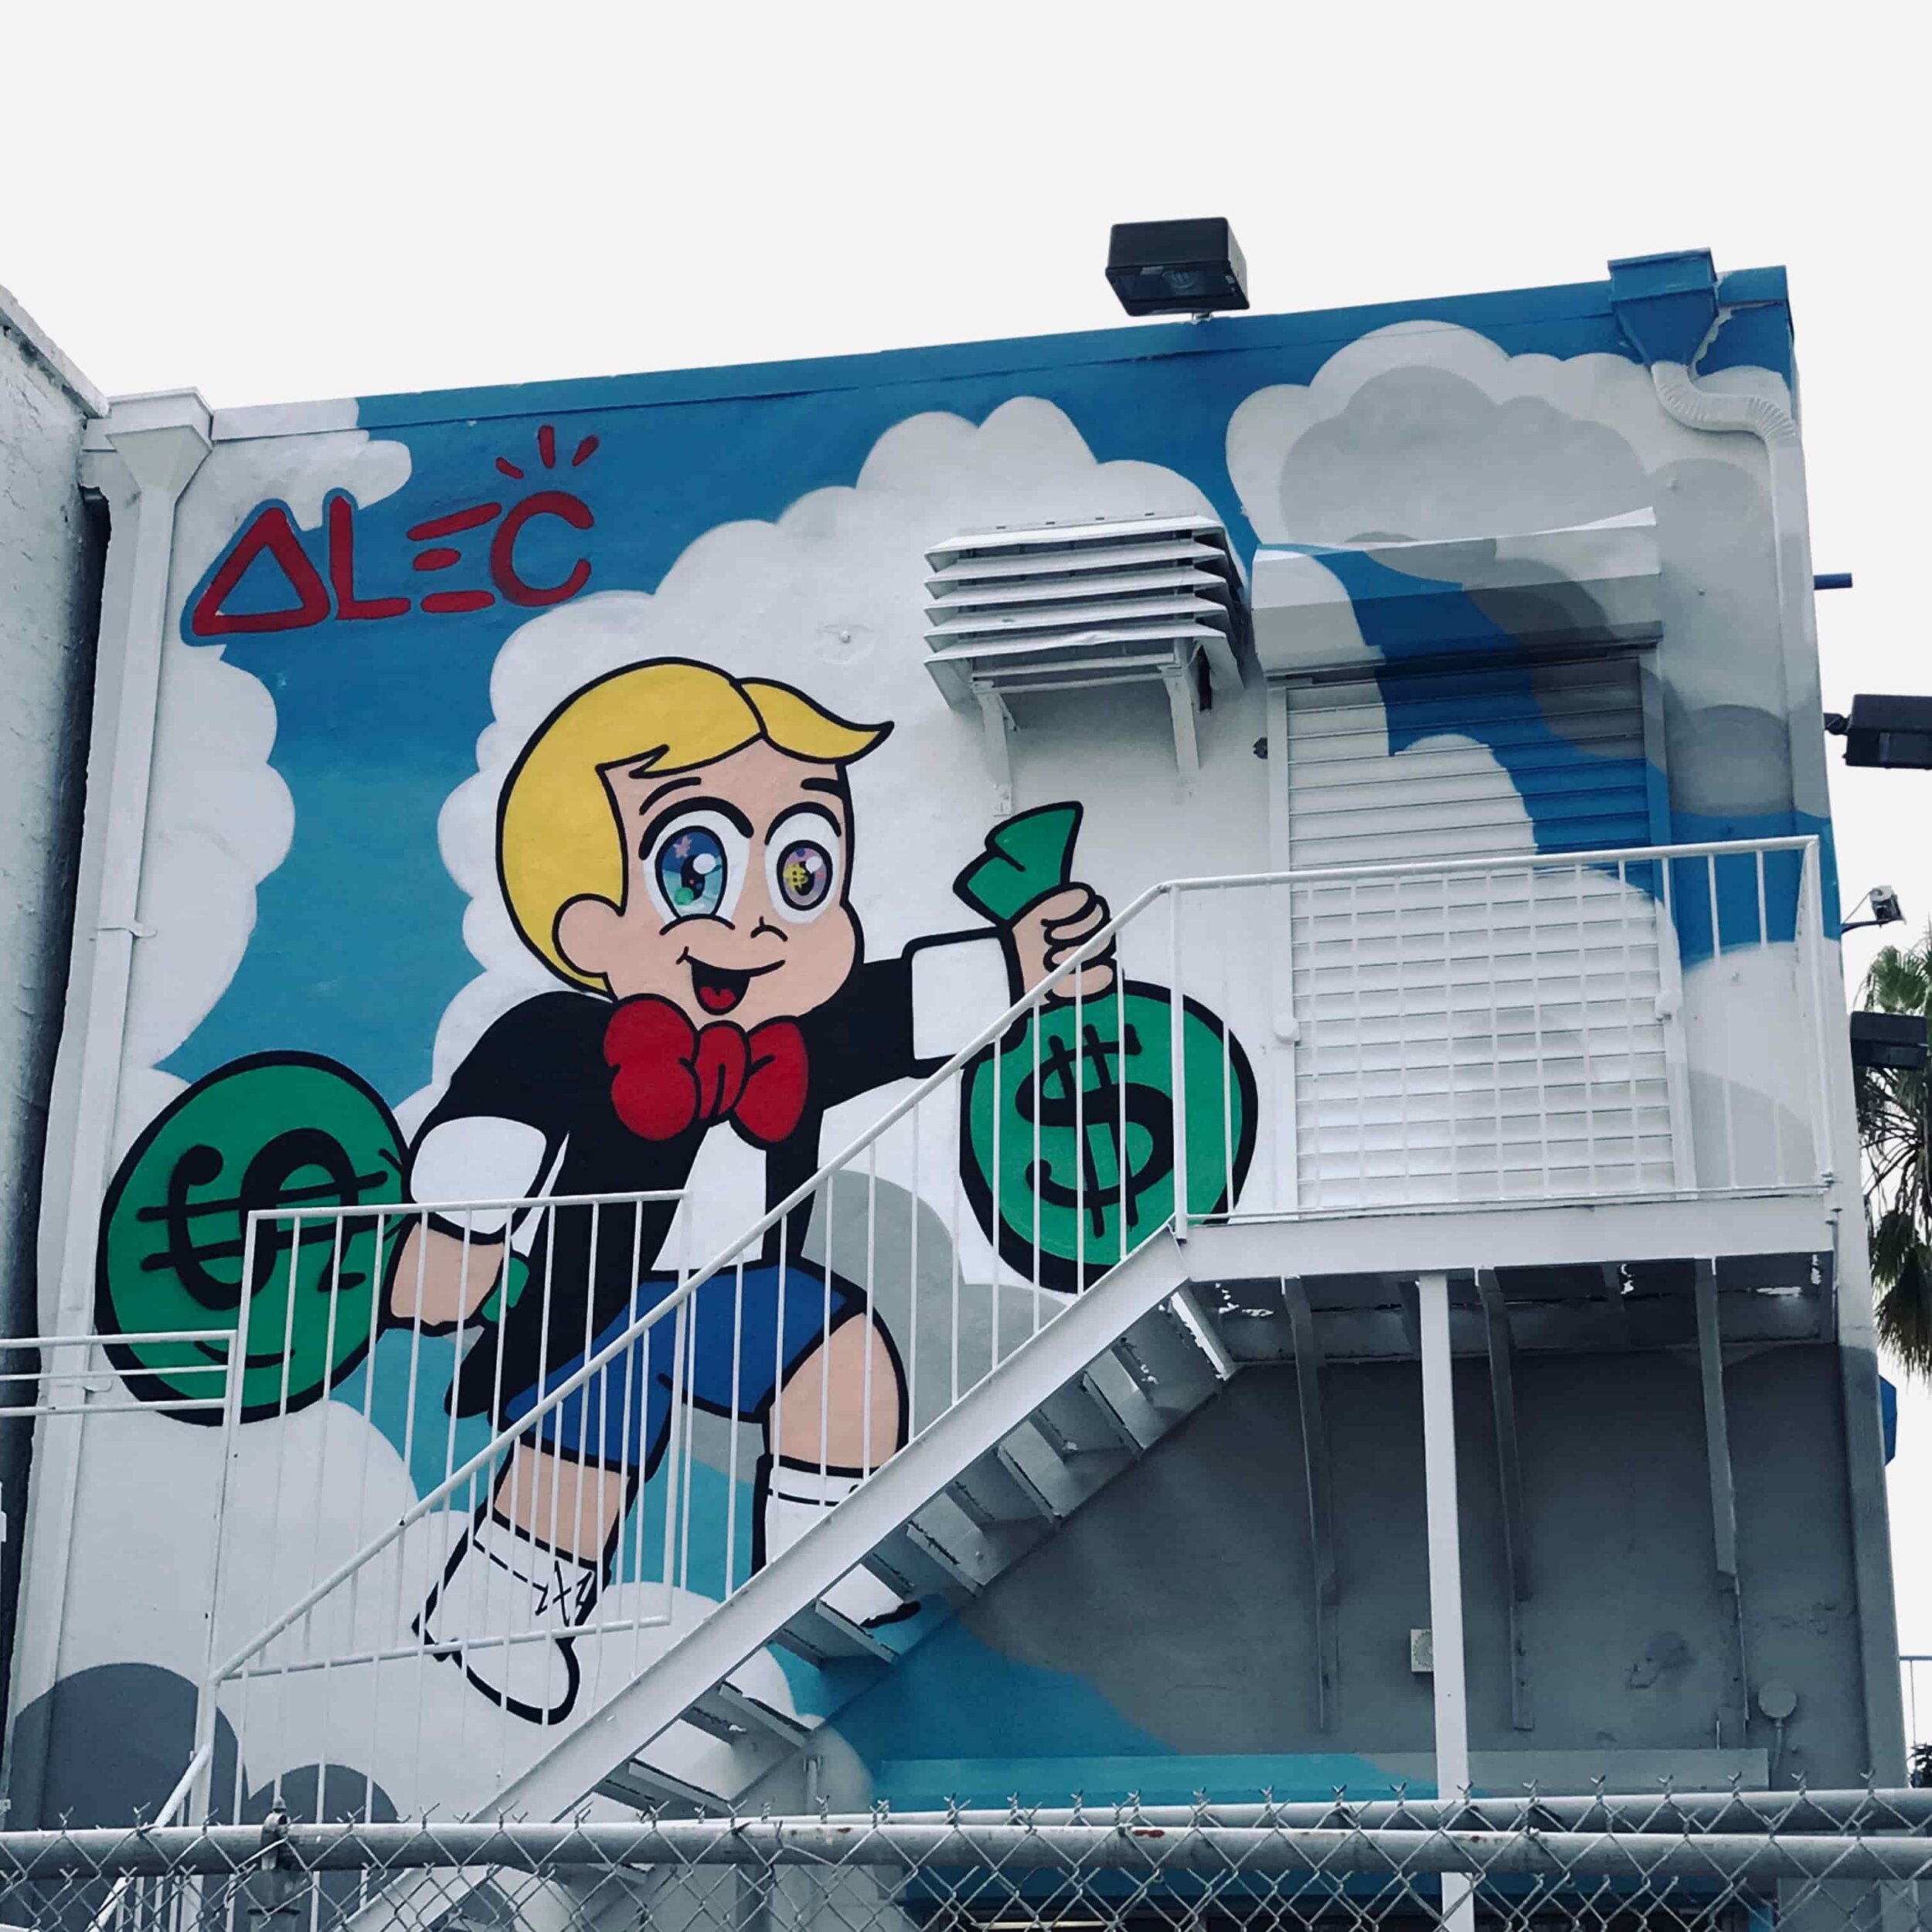 Richie Rich is going UP stairs holding